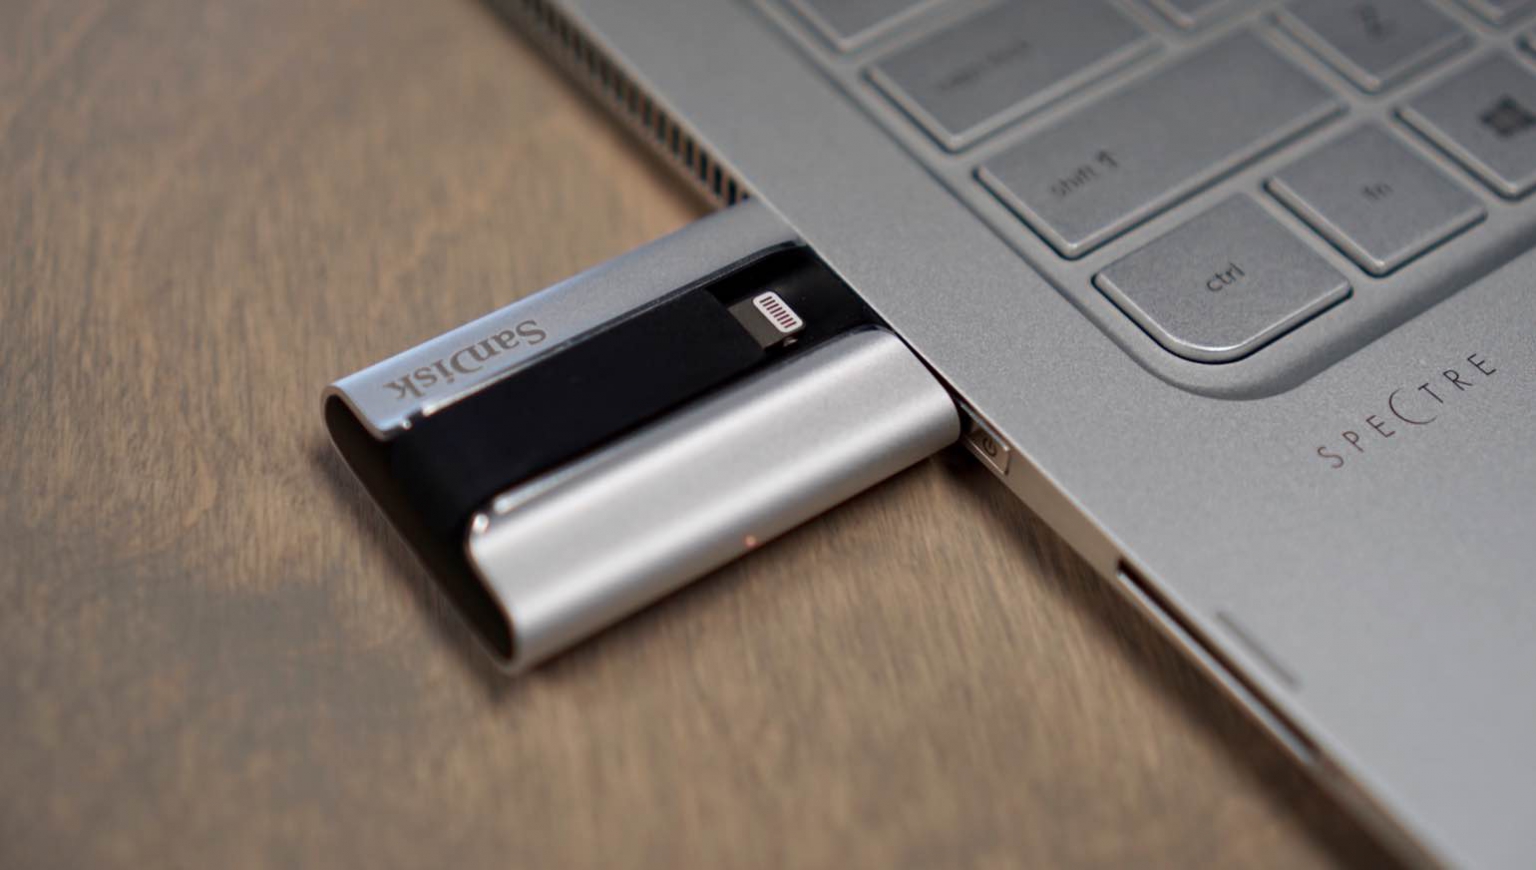 SanDisk 128GB iXpand Flash Drive Go for Your iPhone 